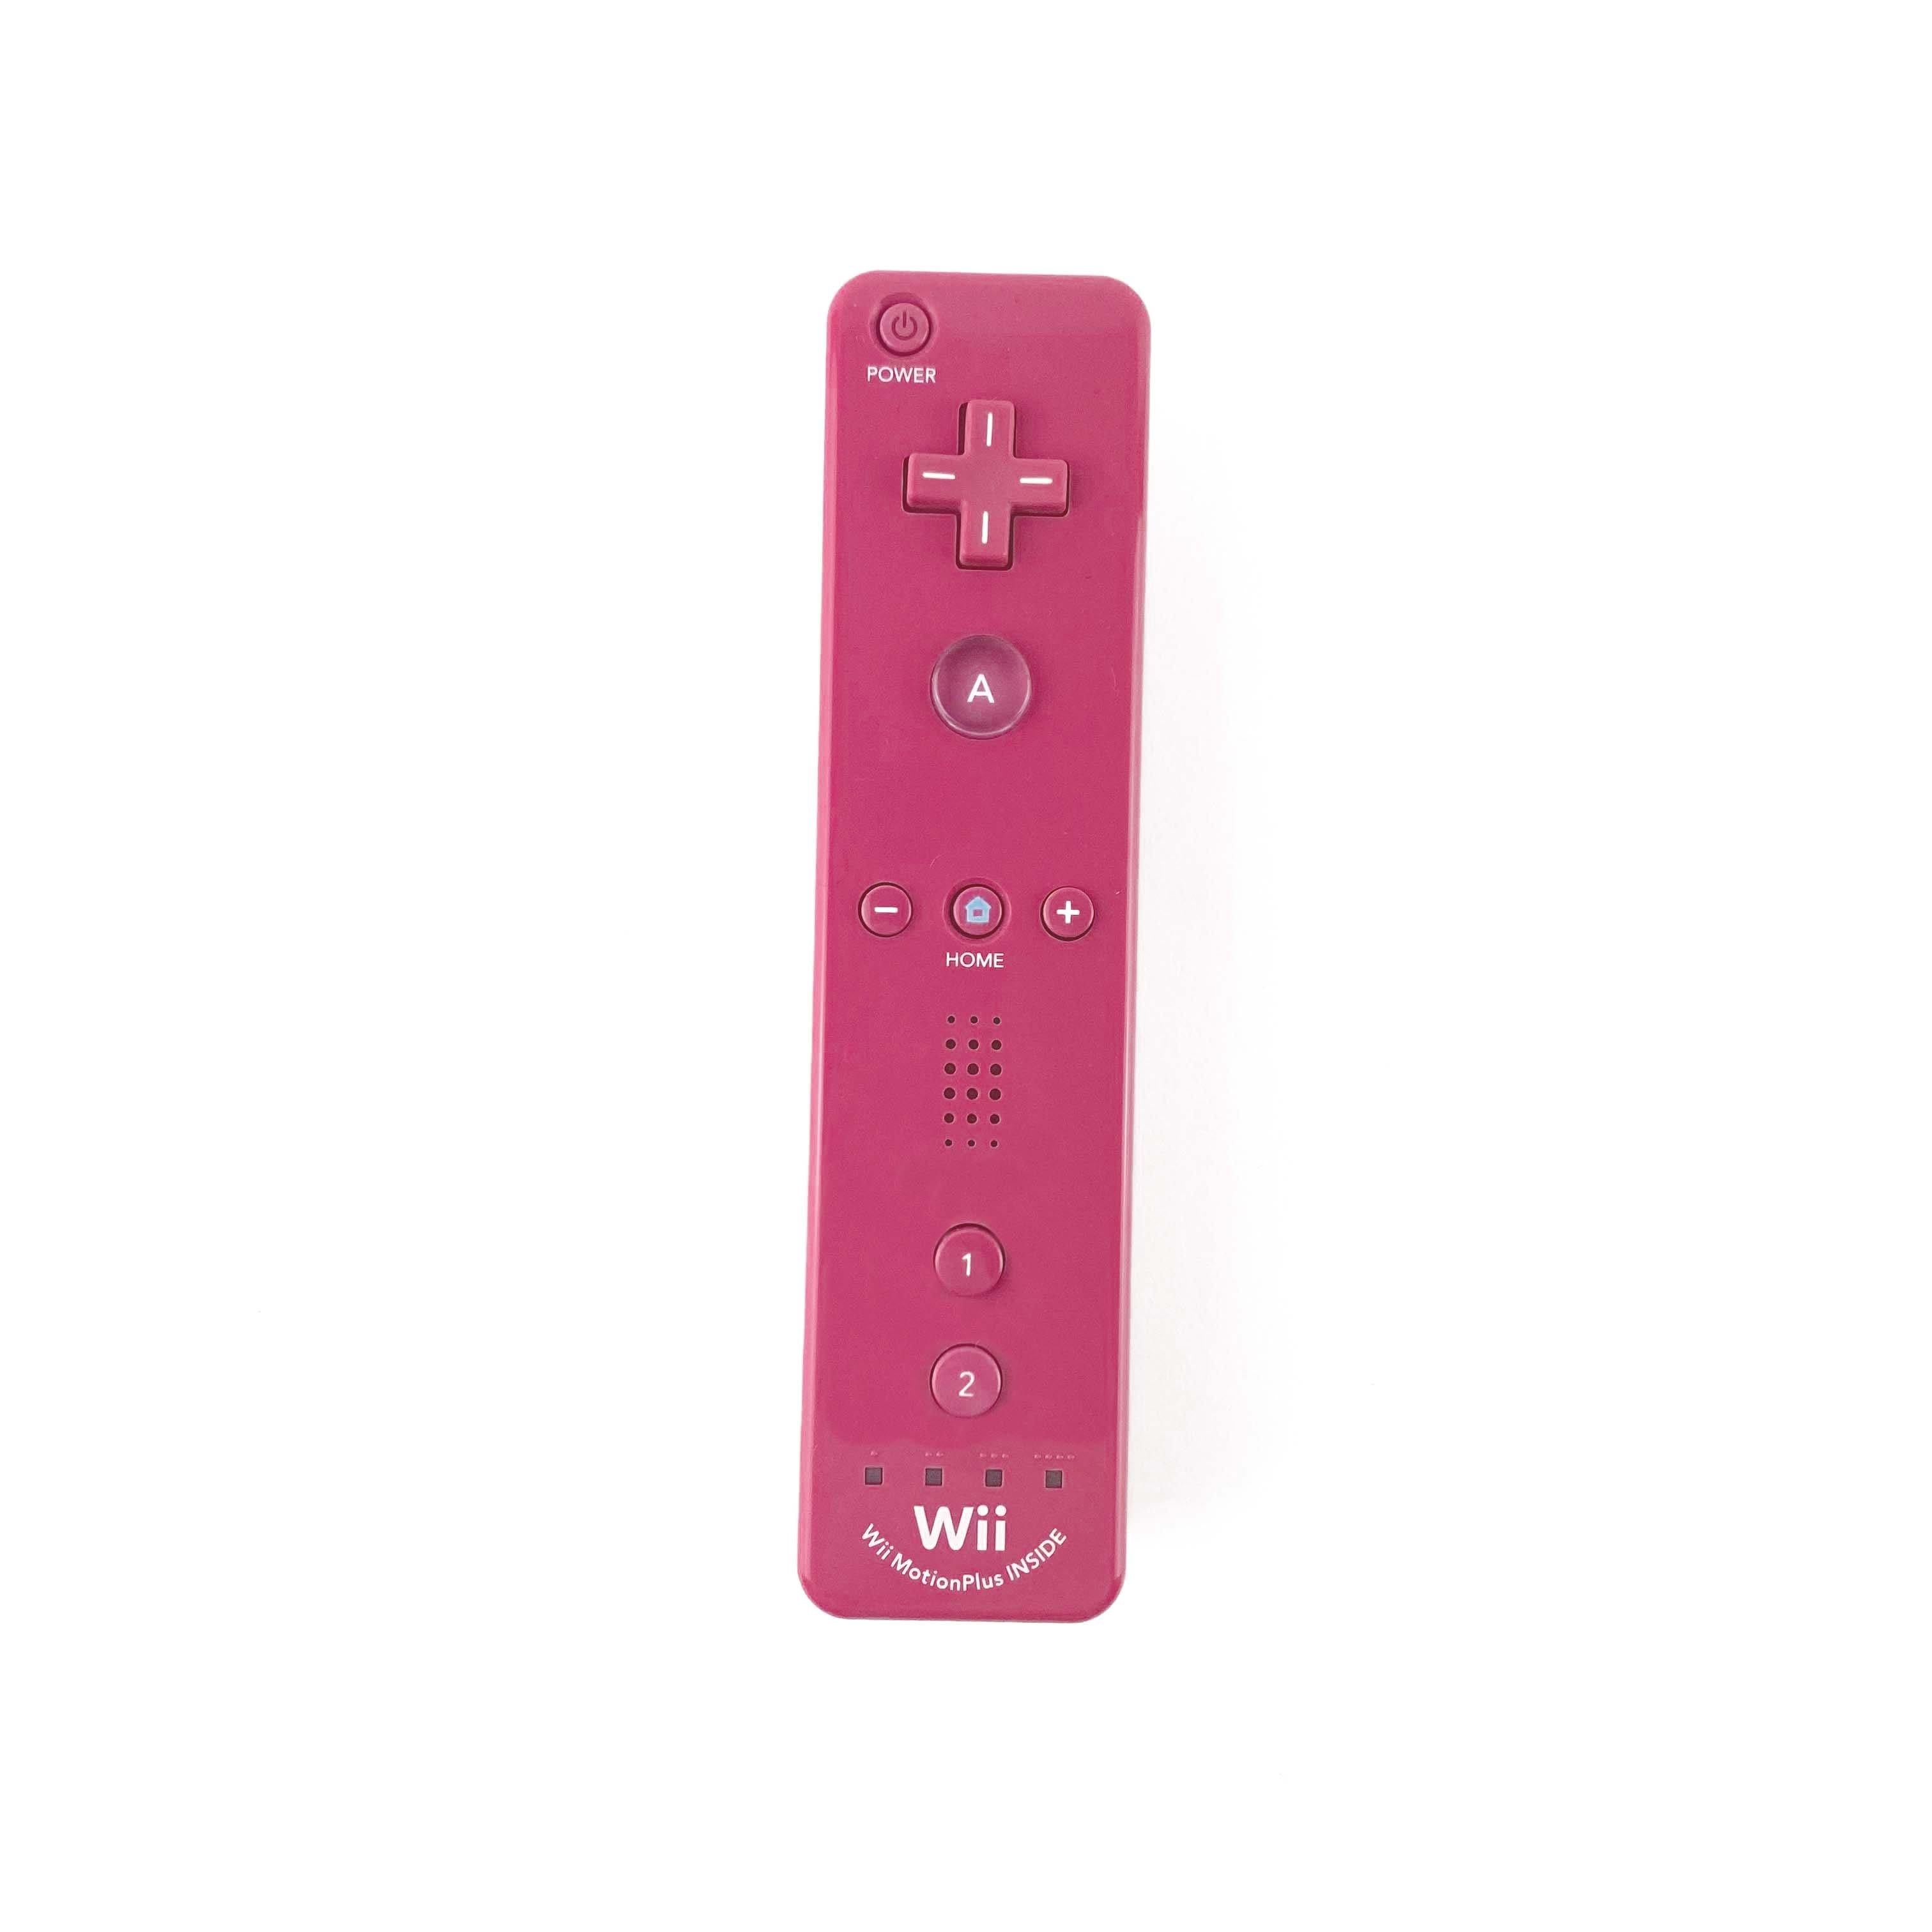 Nintendo Wii Motion Plus Mario Remote Controller (RVL-036) ~ Red and Blue